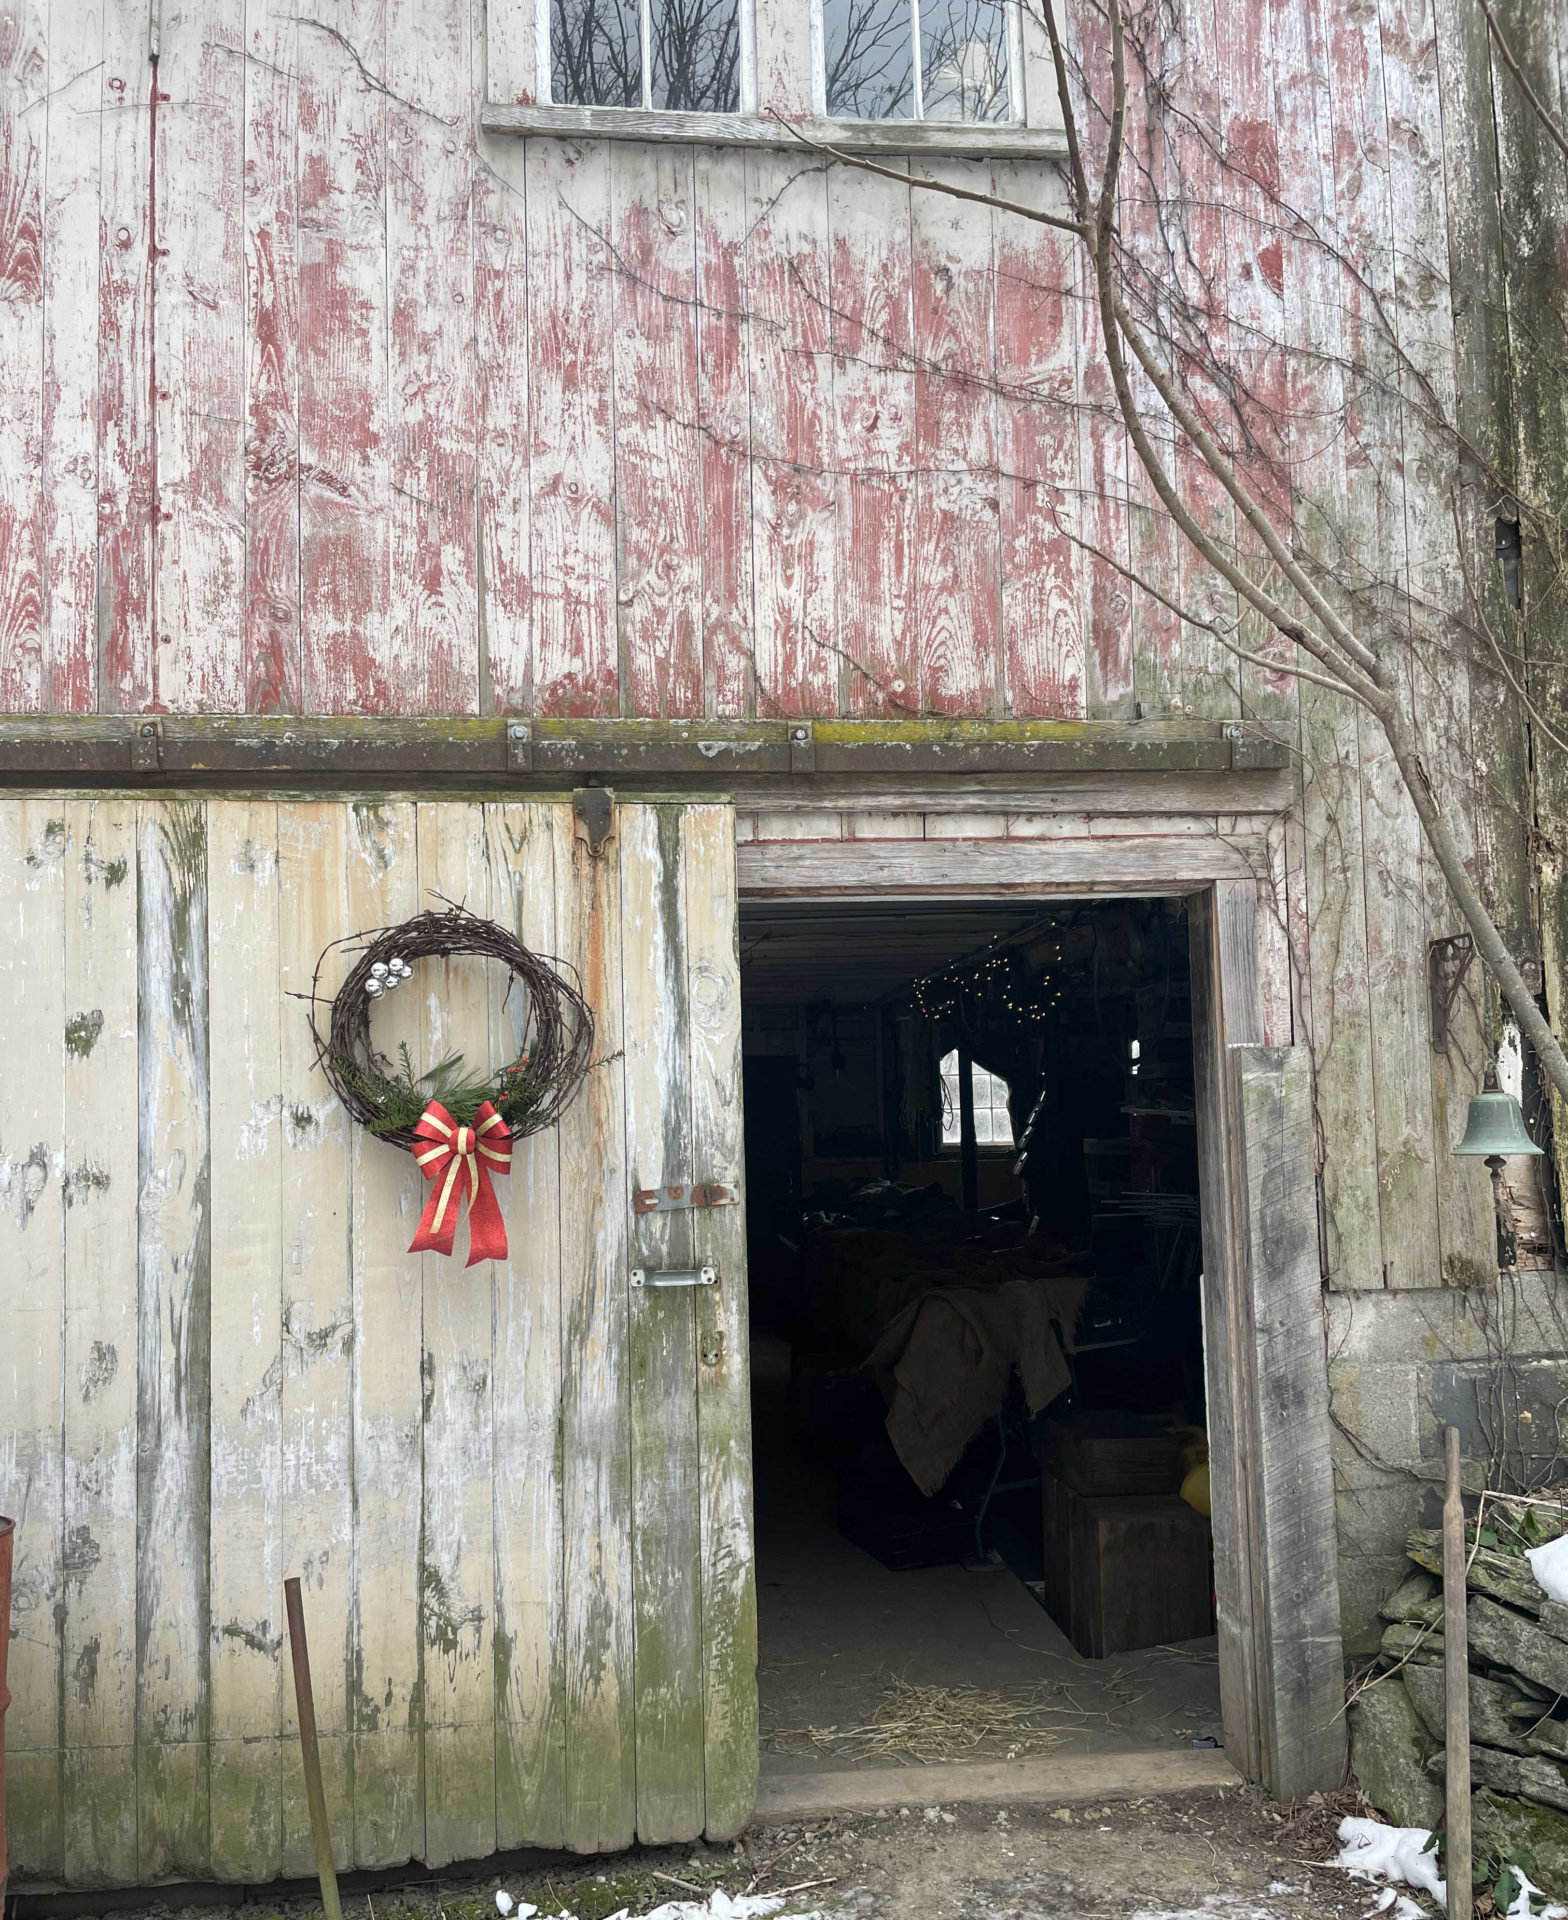 A wreath hangs by the door of the weathered barn at Moon in the Pond Farm in Sheffield.